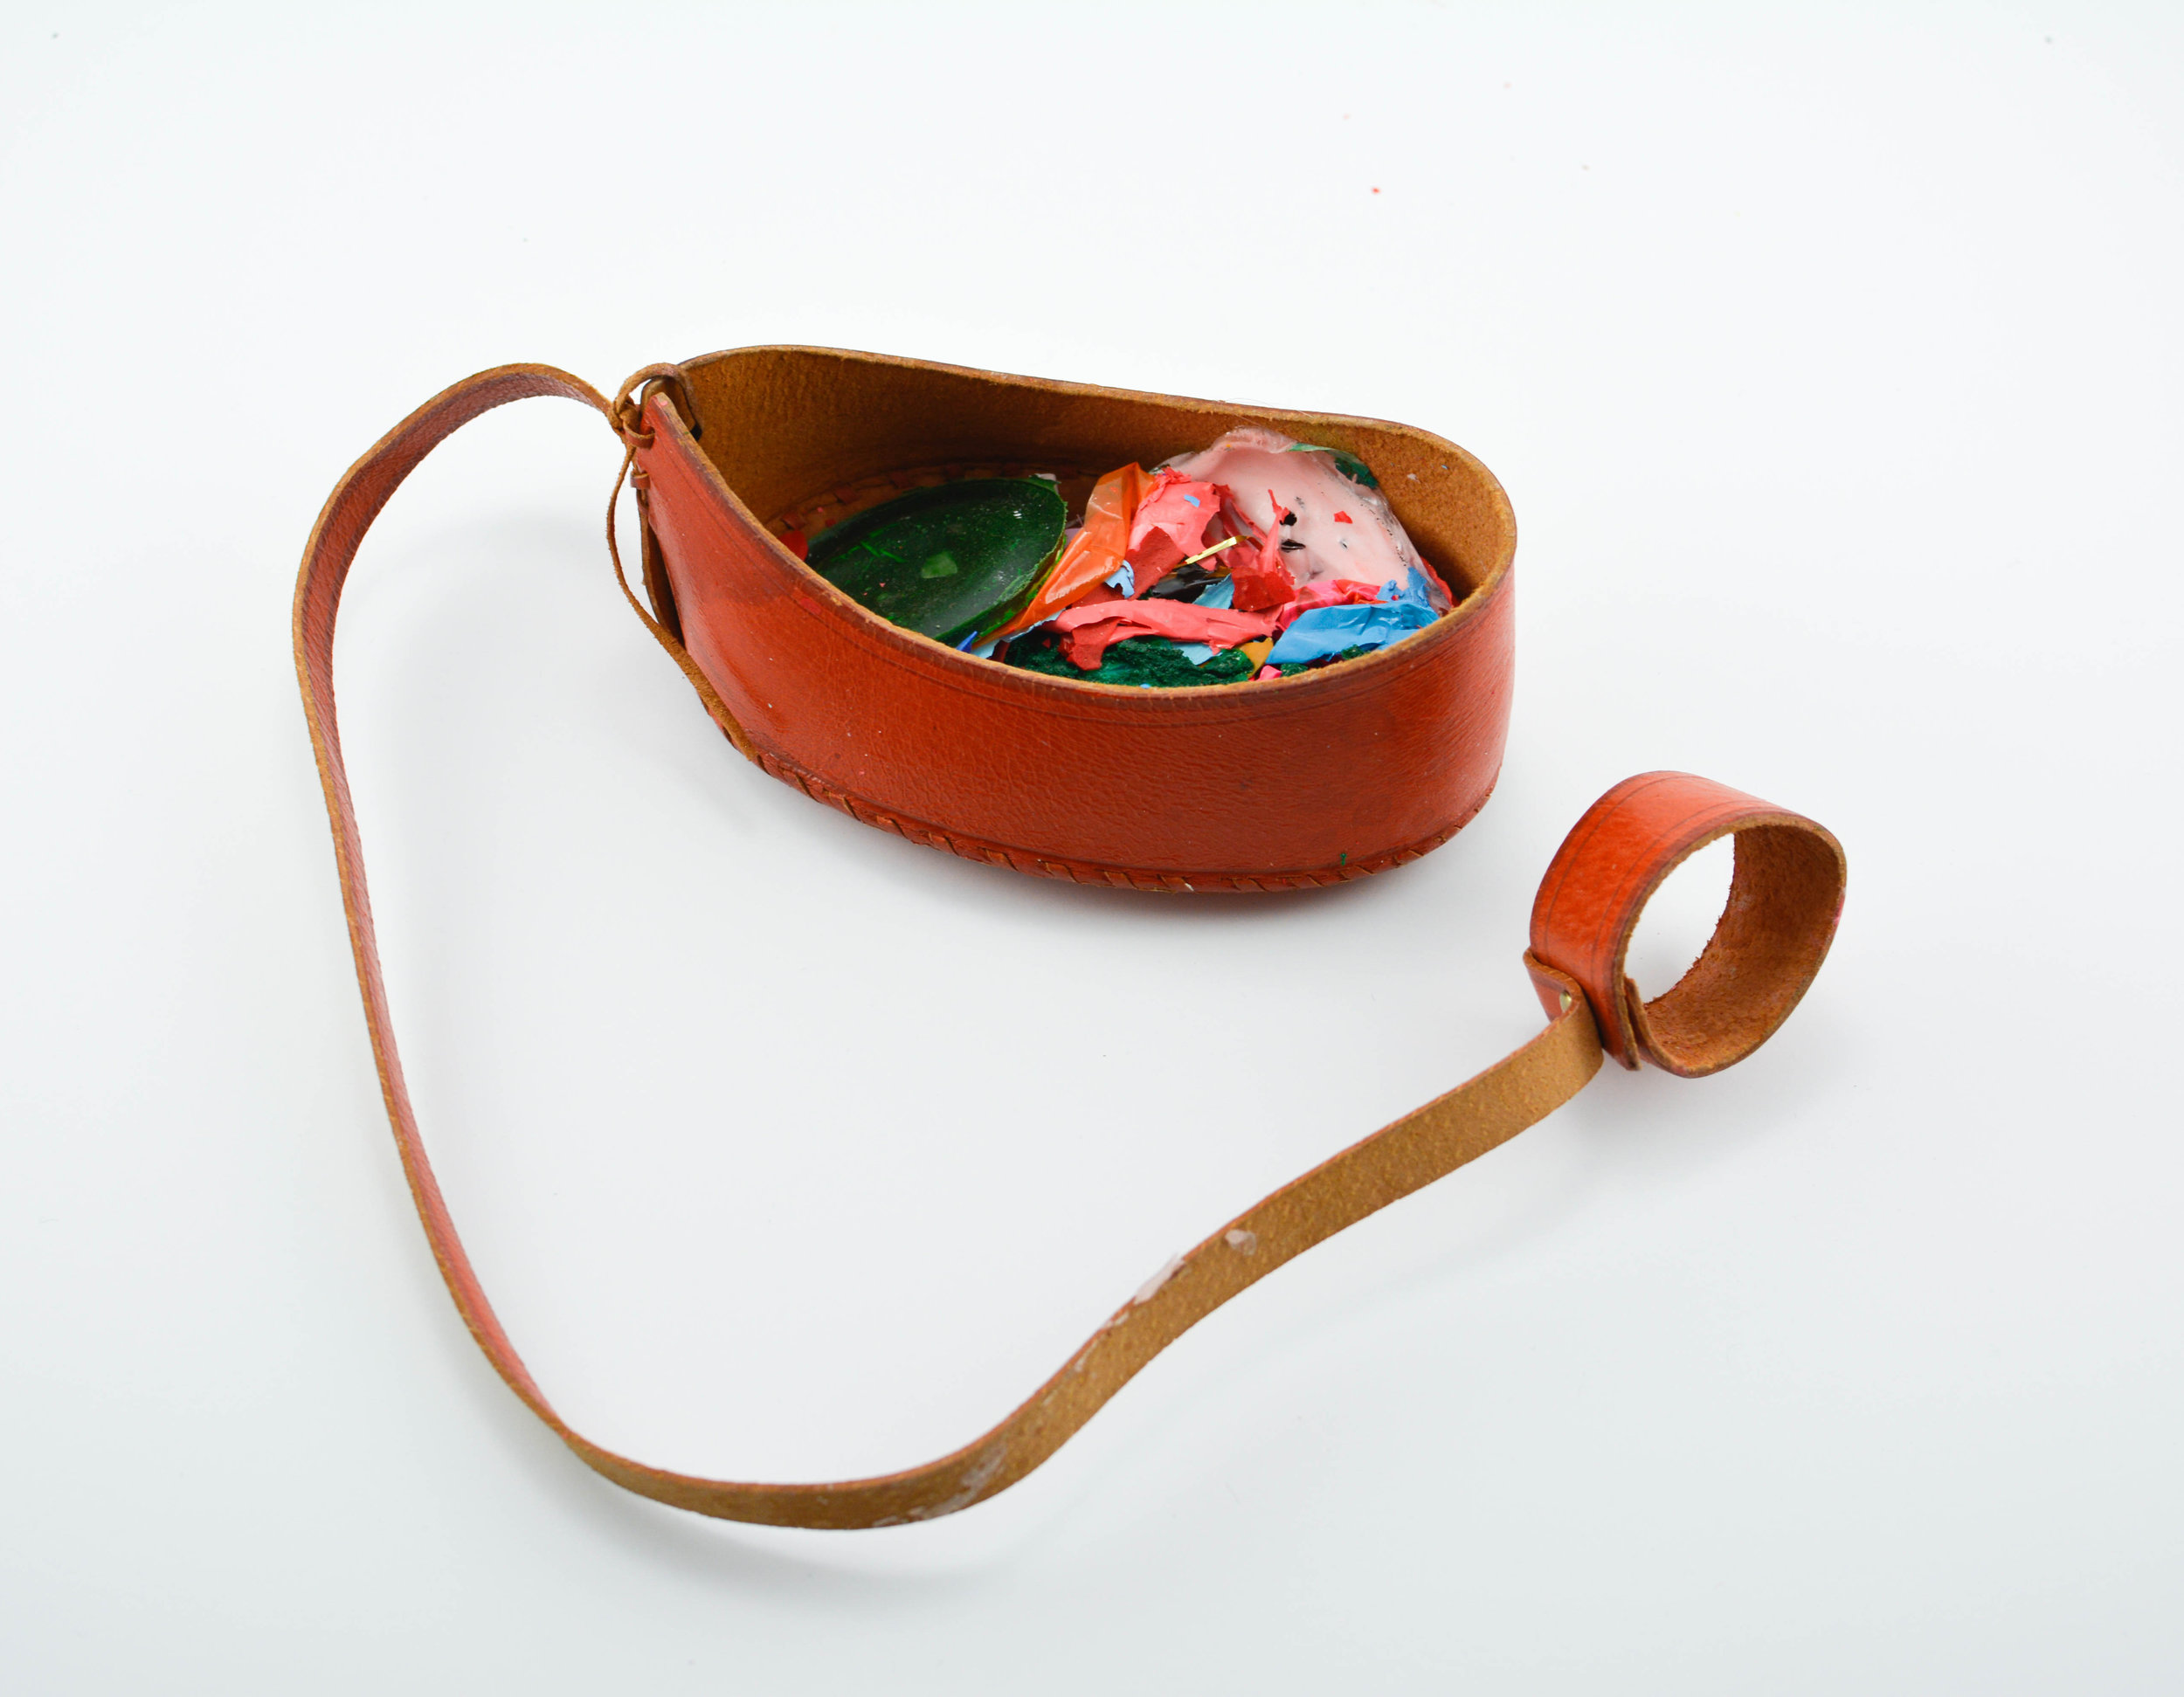  Meg Franklin,  Leather Case with Paint and Wax Chips  